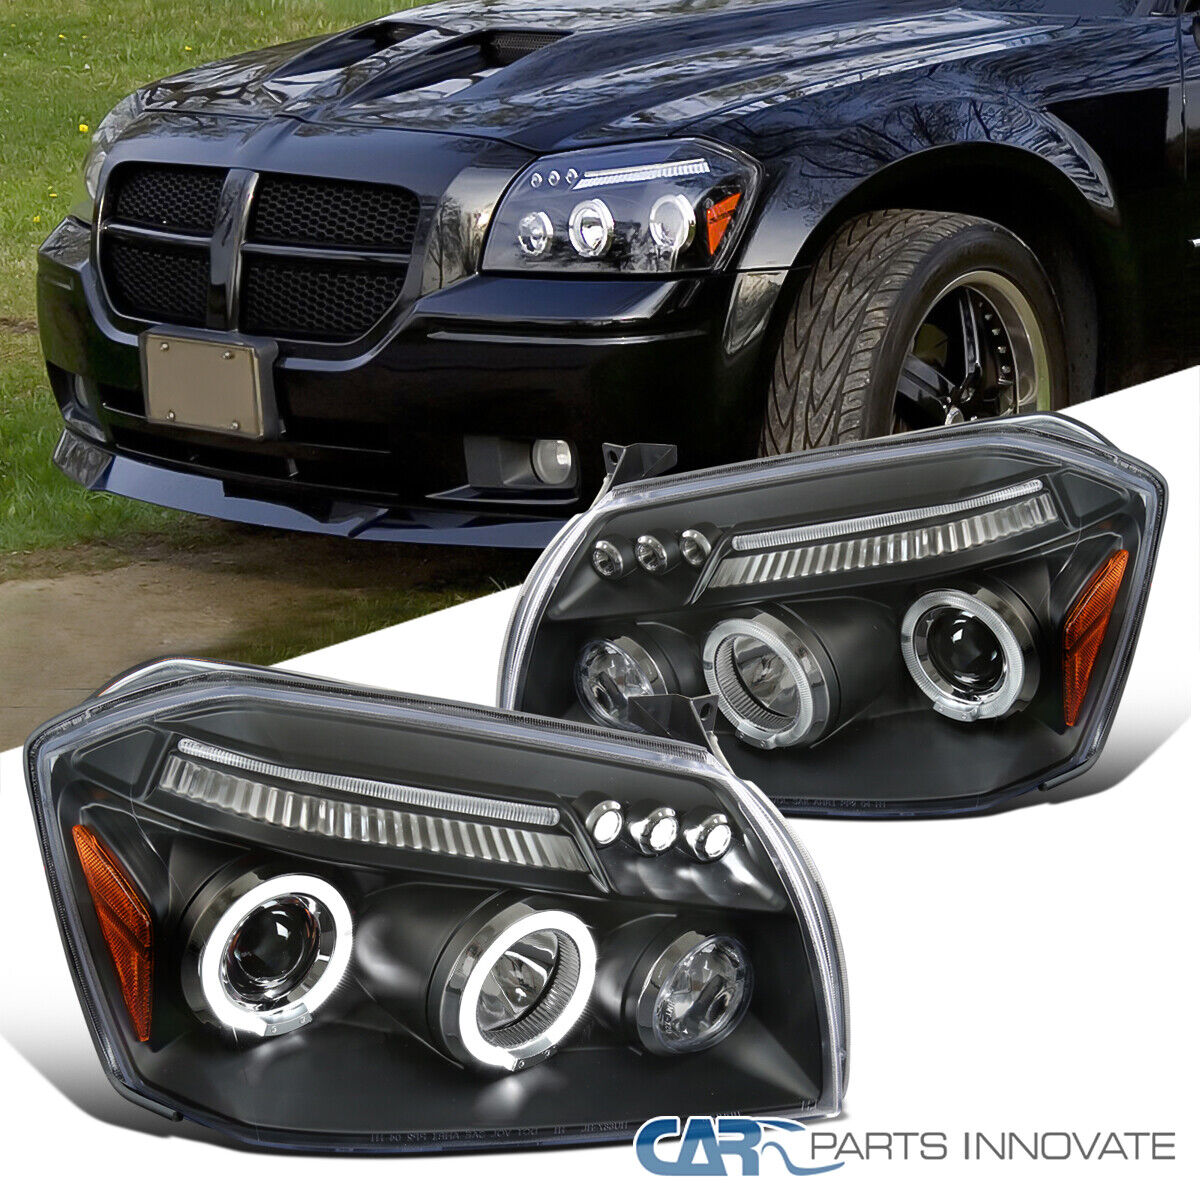 Black Fits 2005-2007 Dodge Magnum LED Halo Projector Headlights Lamps Left+Right